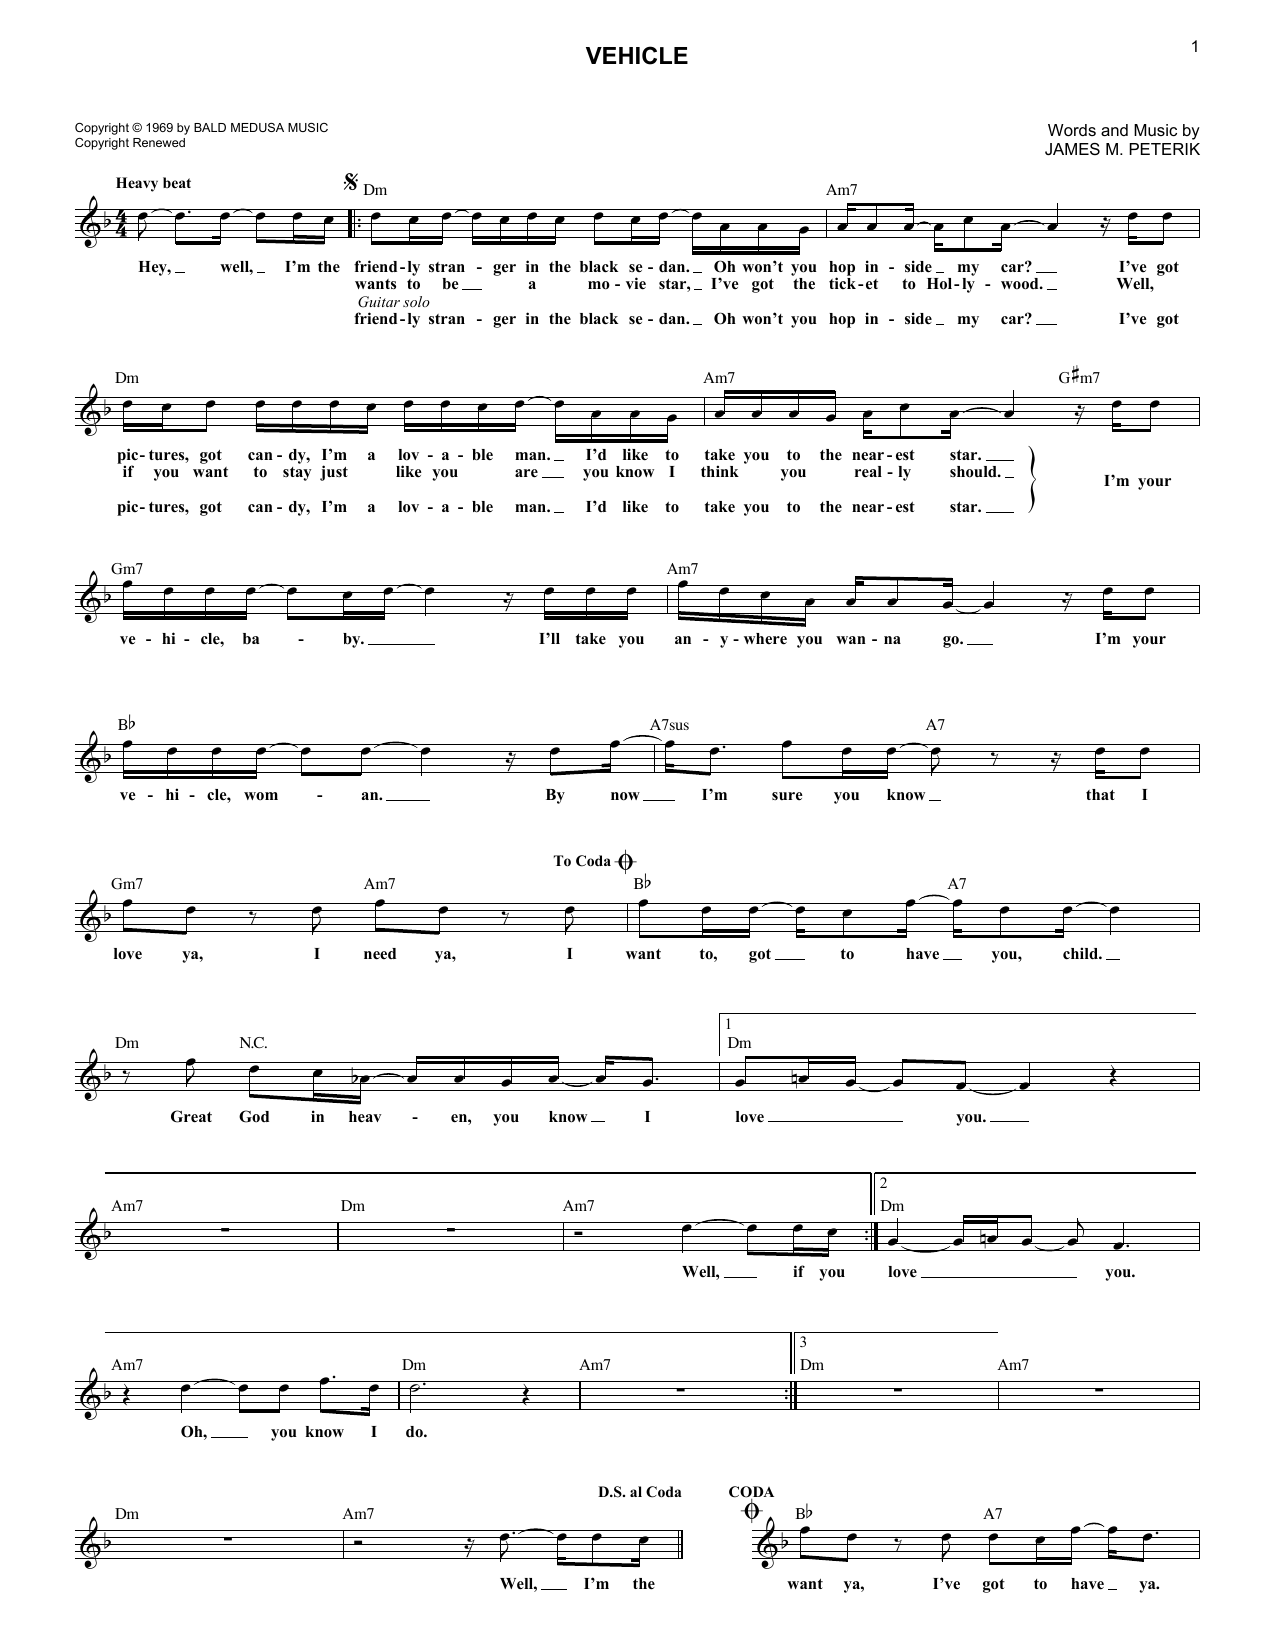 Download The Ides Of March Vehicle Sheet Music